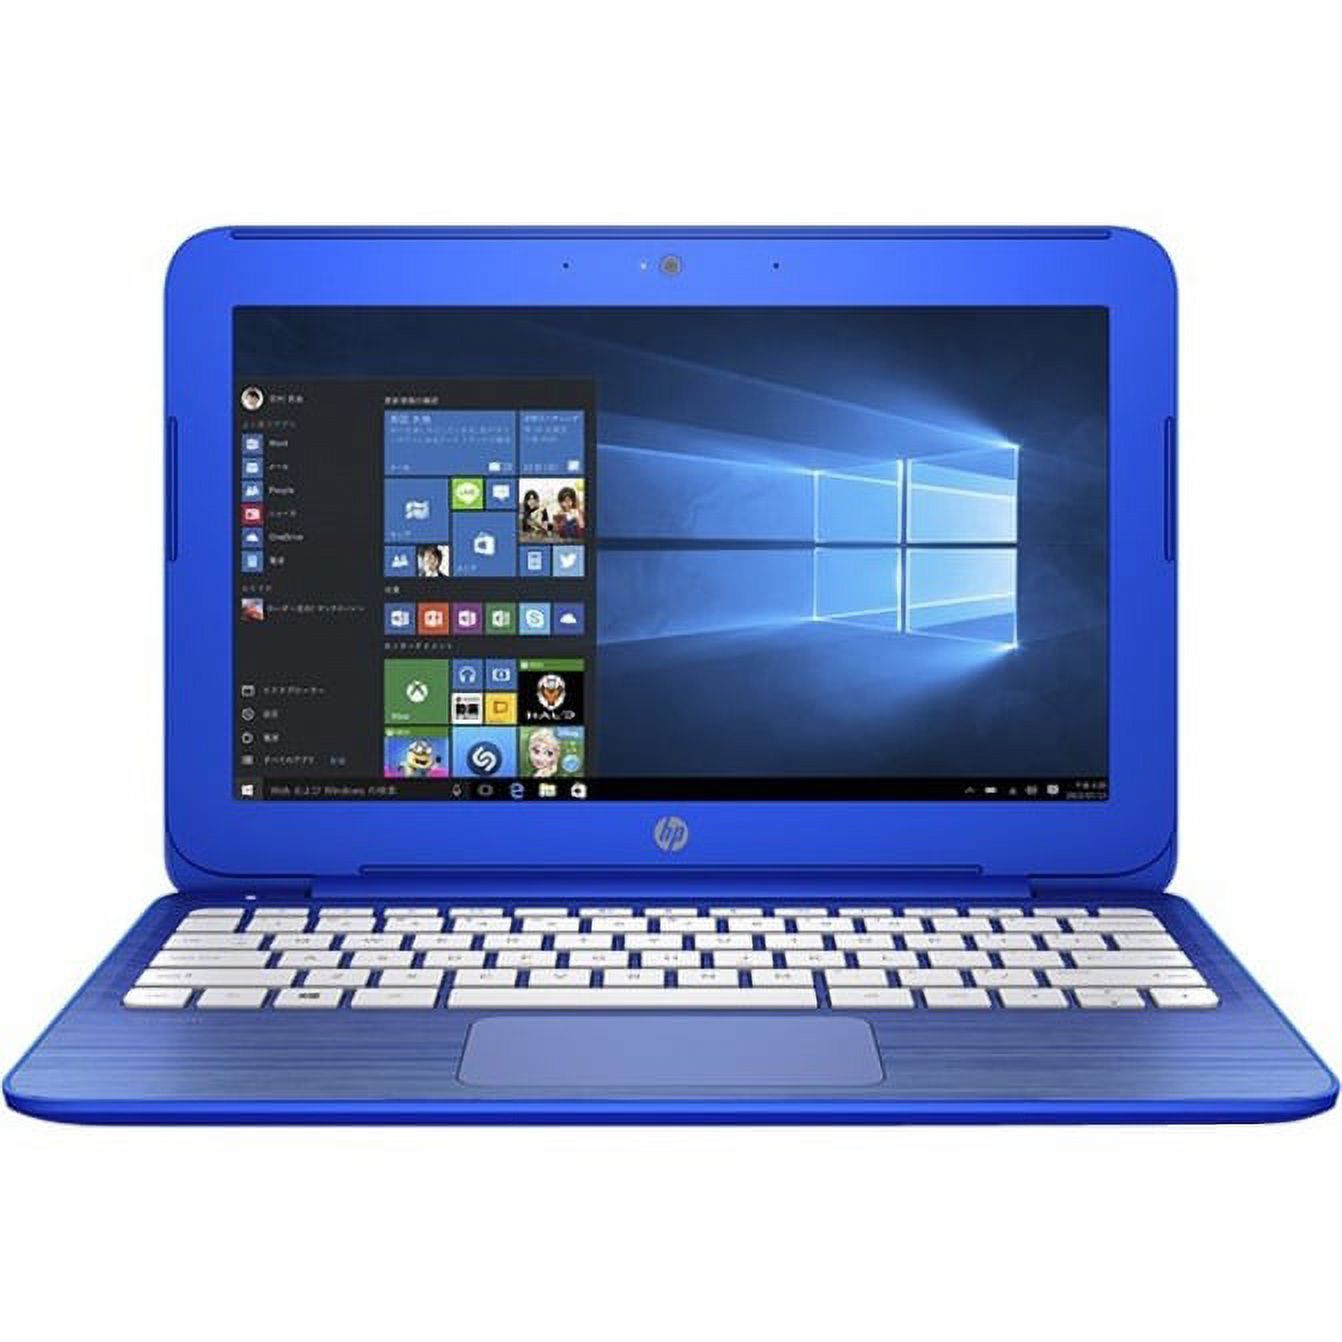 HP 11.6" 11-r014wm Stream Laptop PC, Windows 10 Home, Office 365 Personal 1 year subscription included, Intel Celeron N3050 Dual-Core Processor, 2GB Memory, 32GB Hard Drive - image 1 of 6